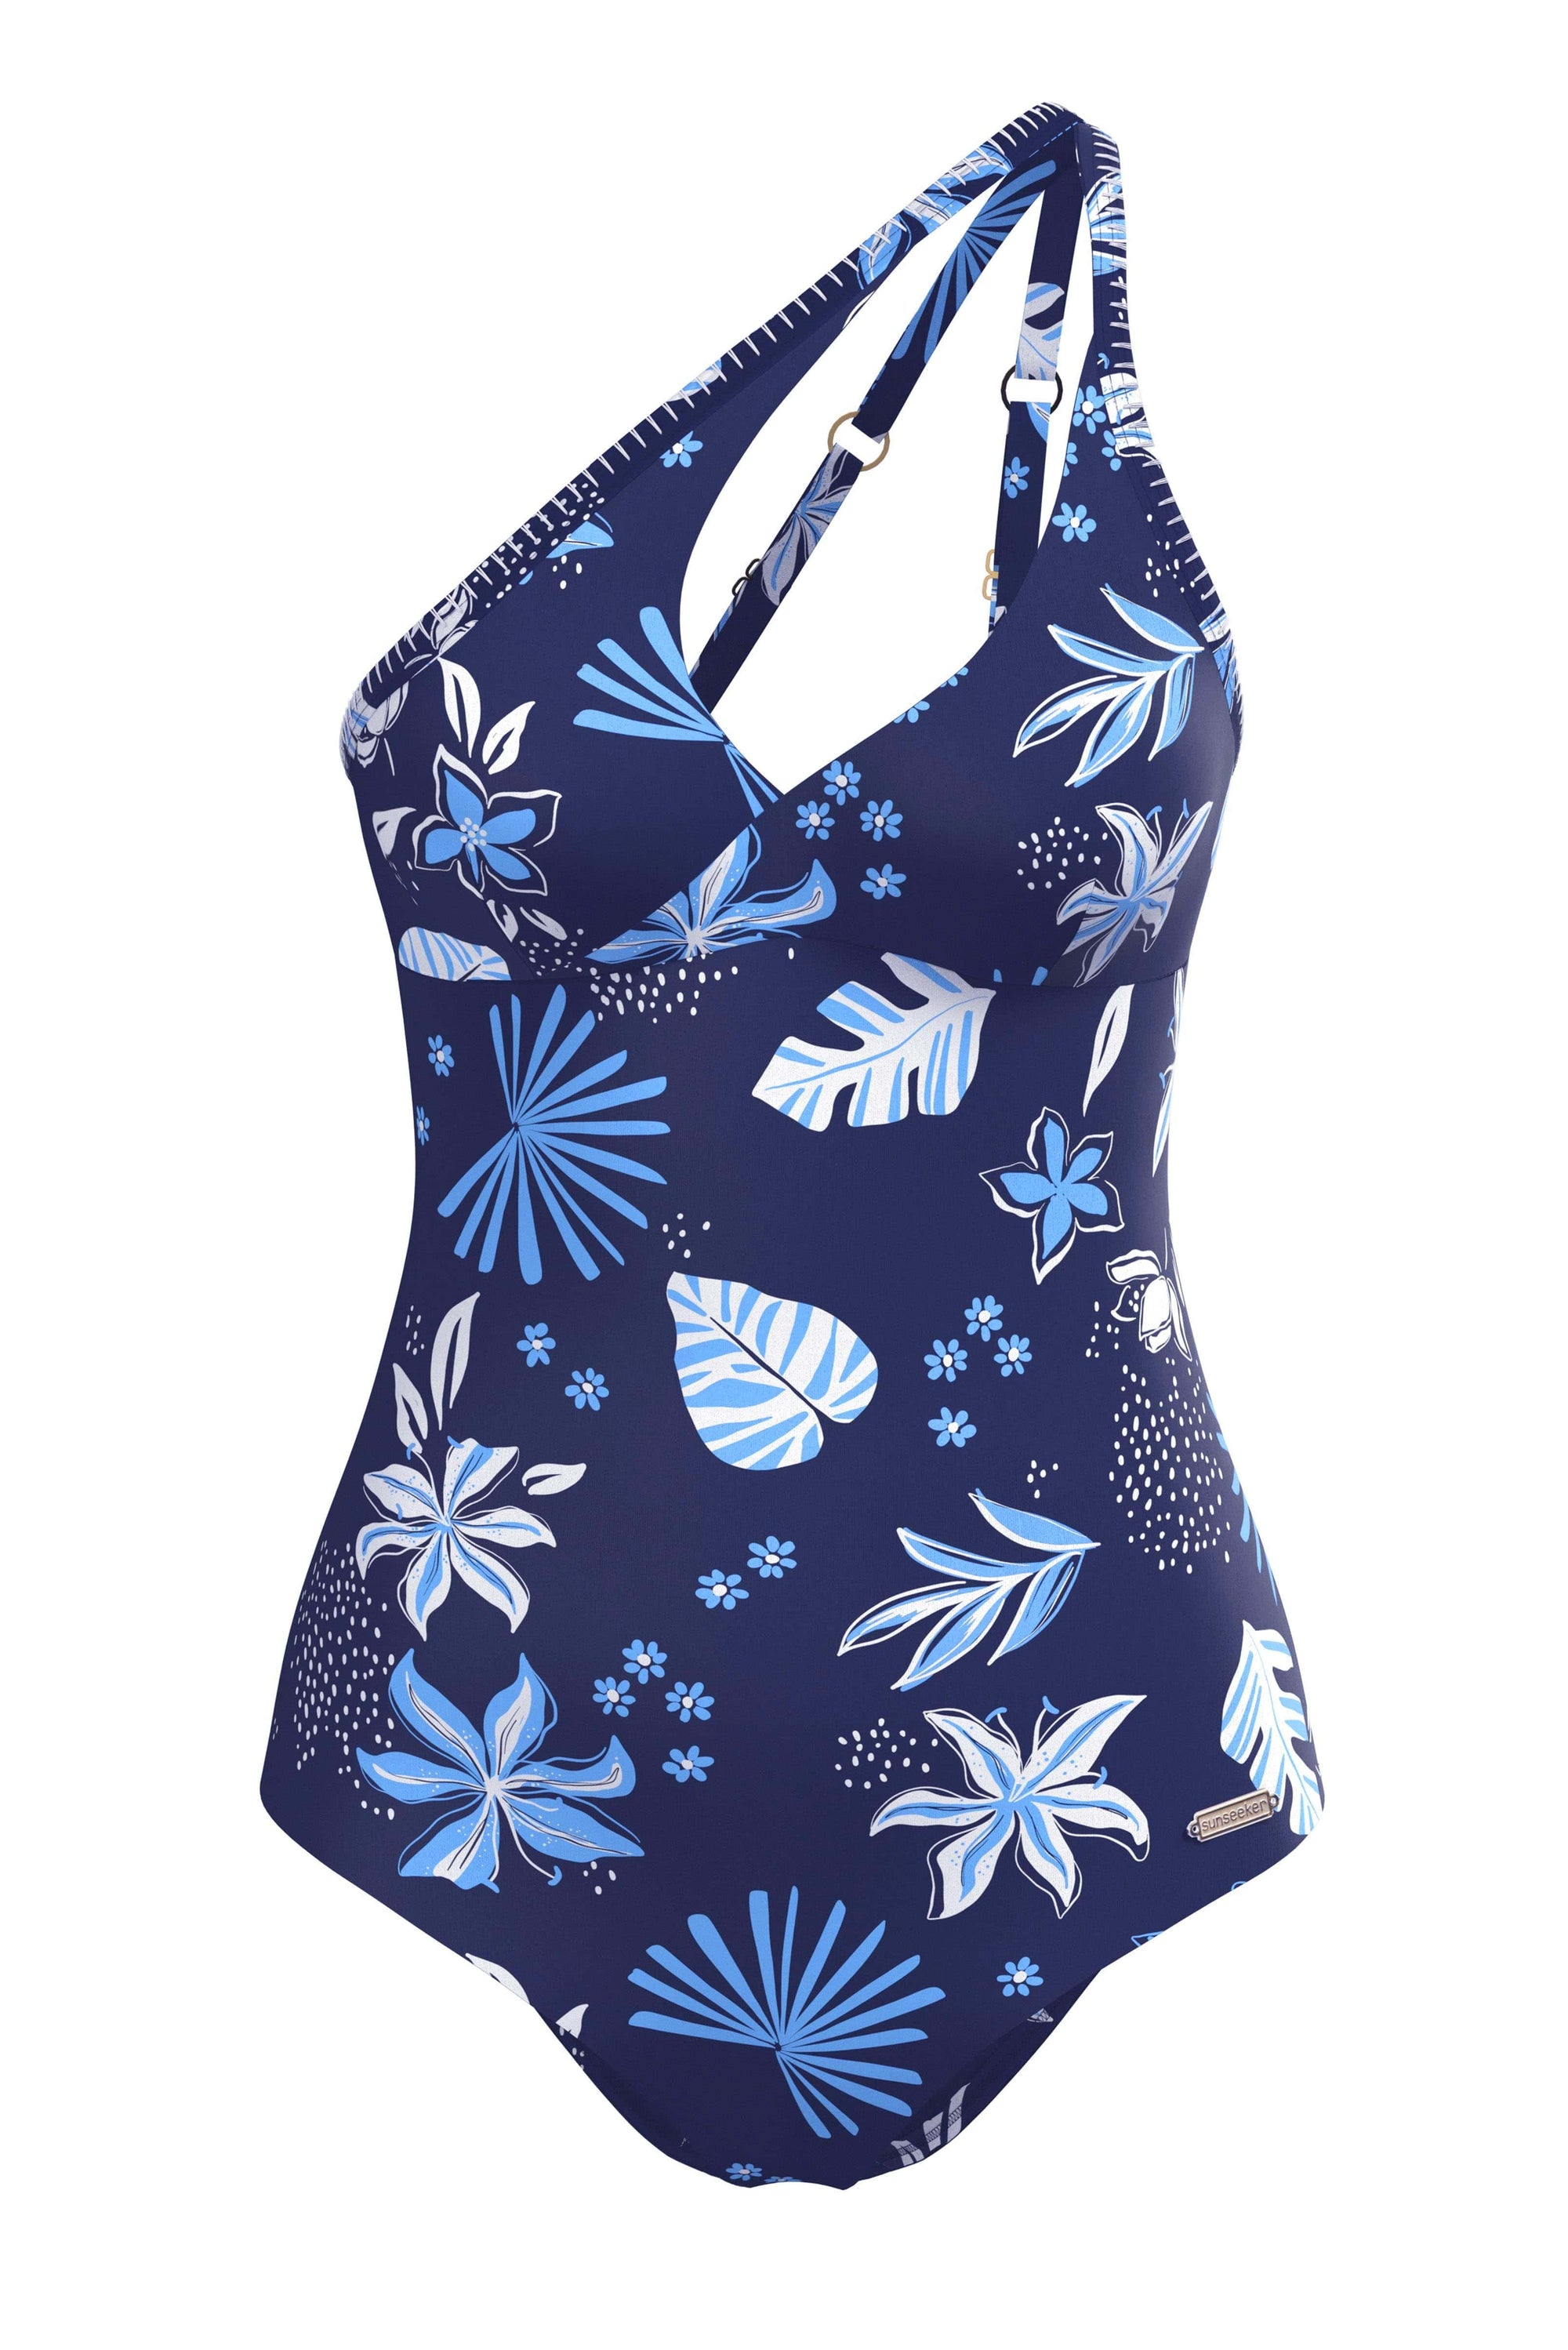 South Pacific Palm Navy One Shoulder One piece